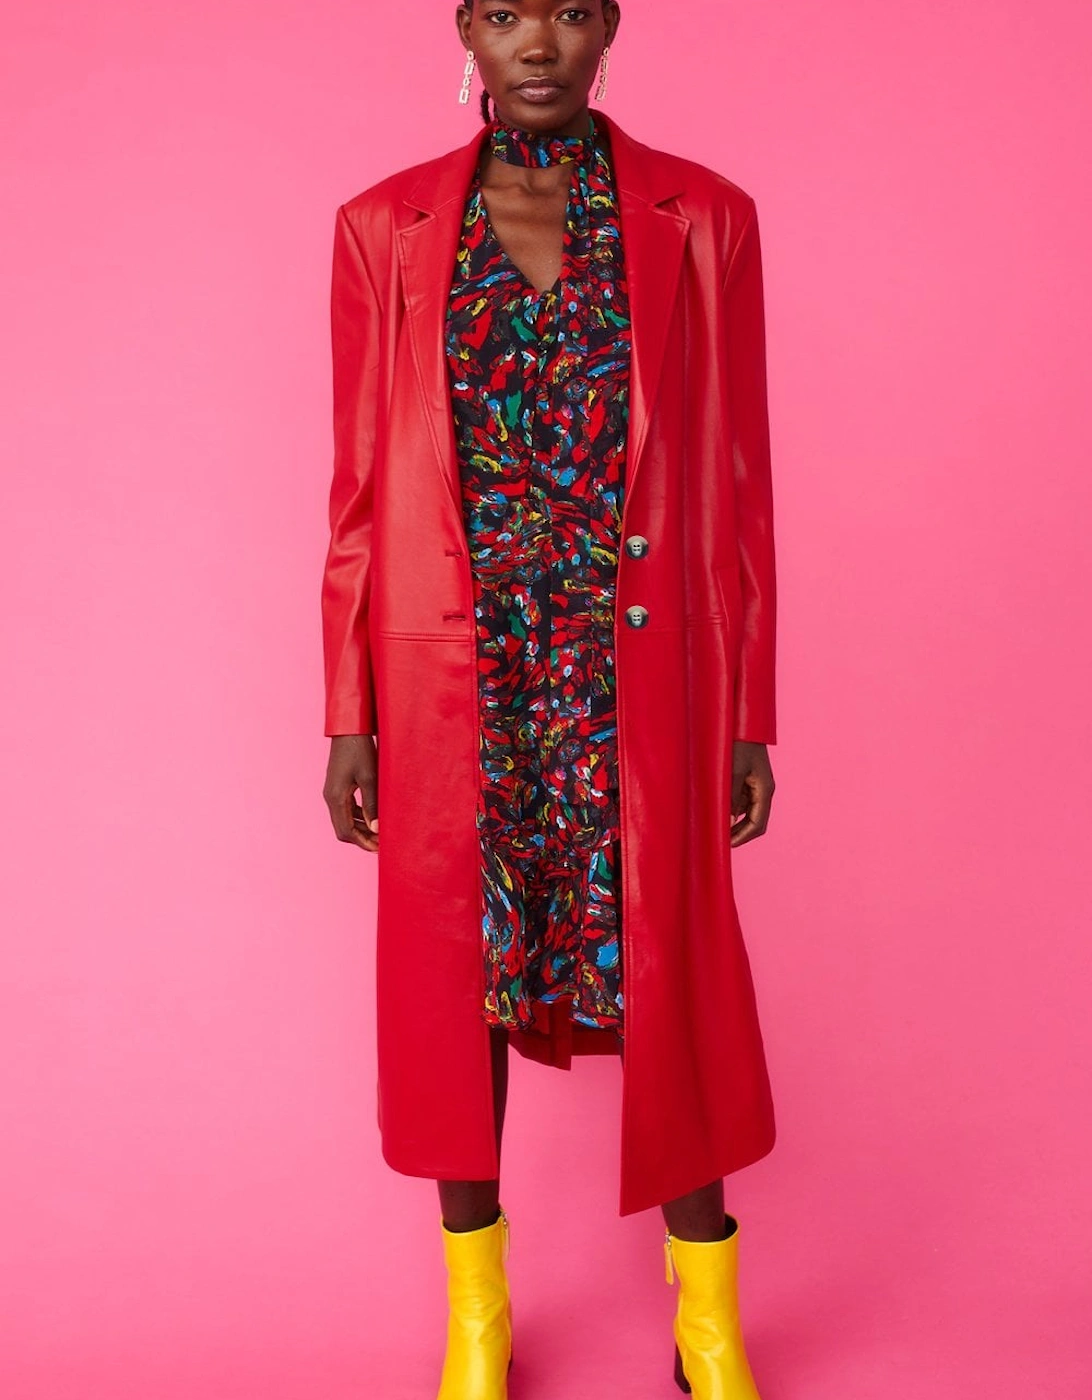 Red Eco Leather Trench Coat